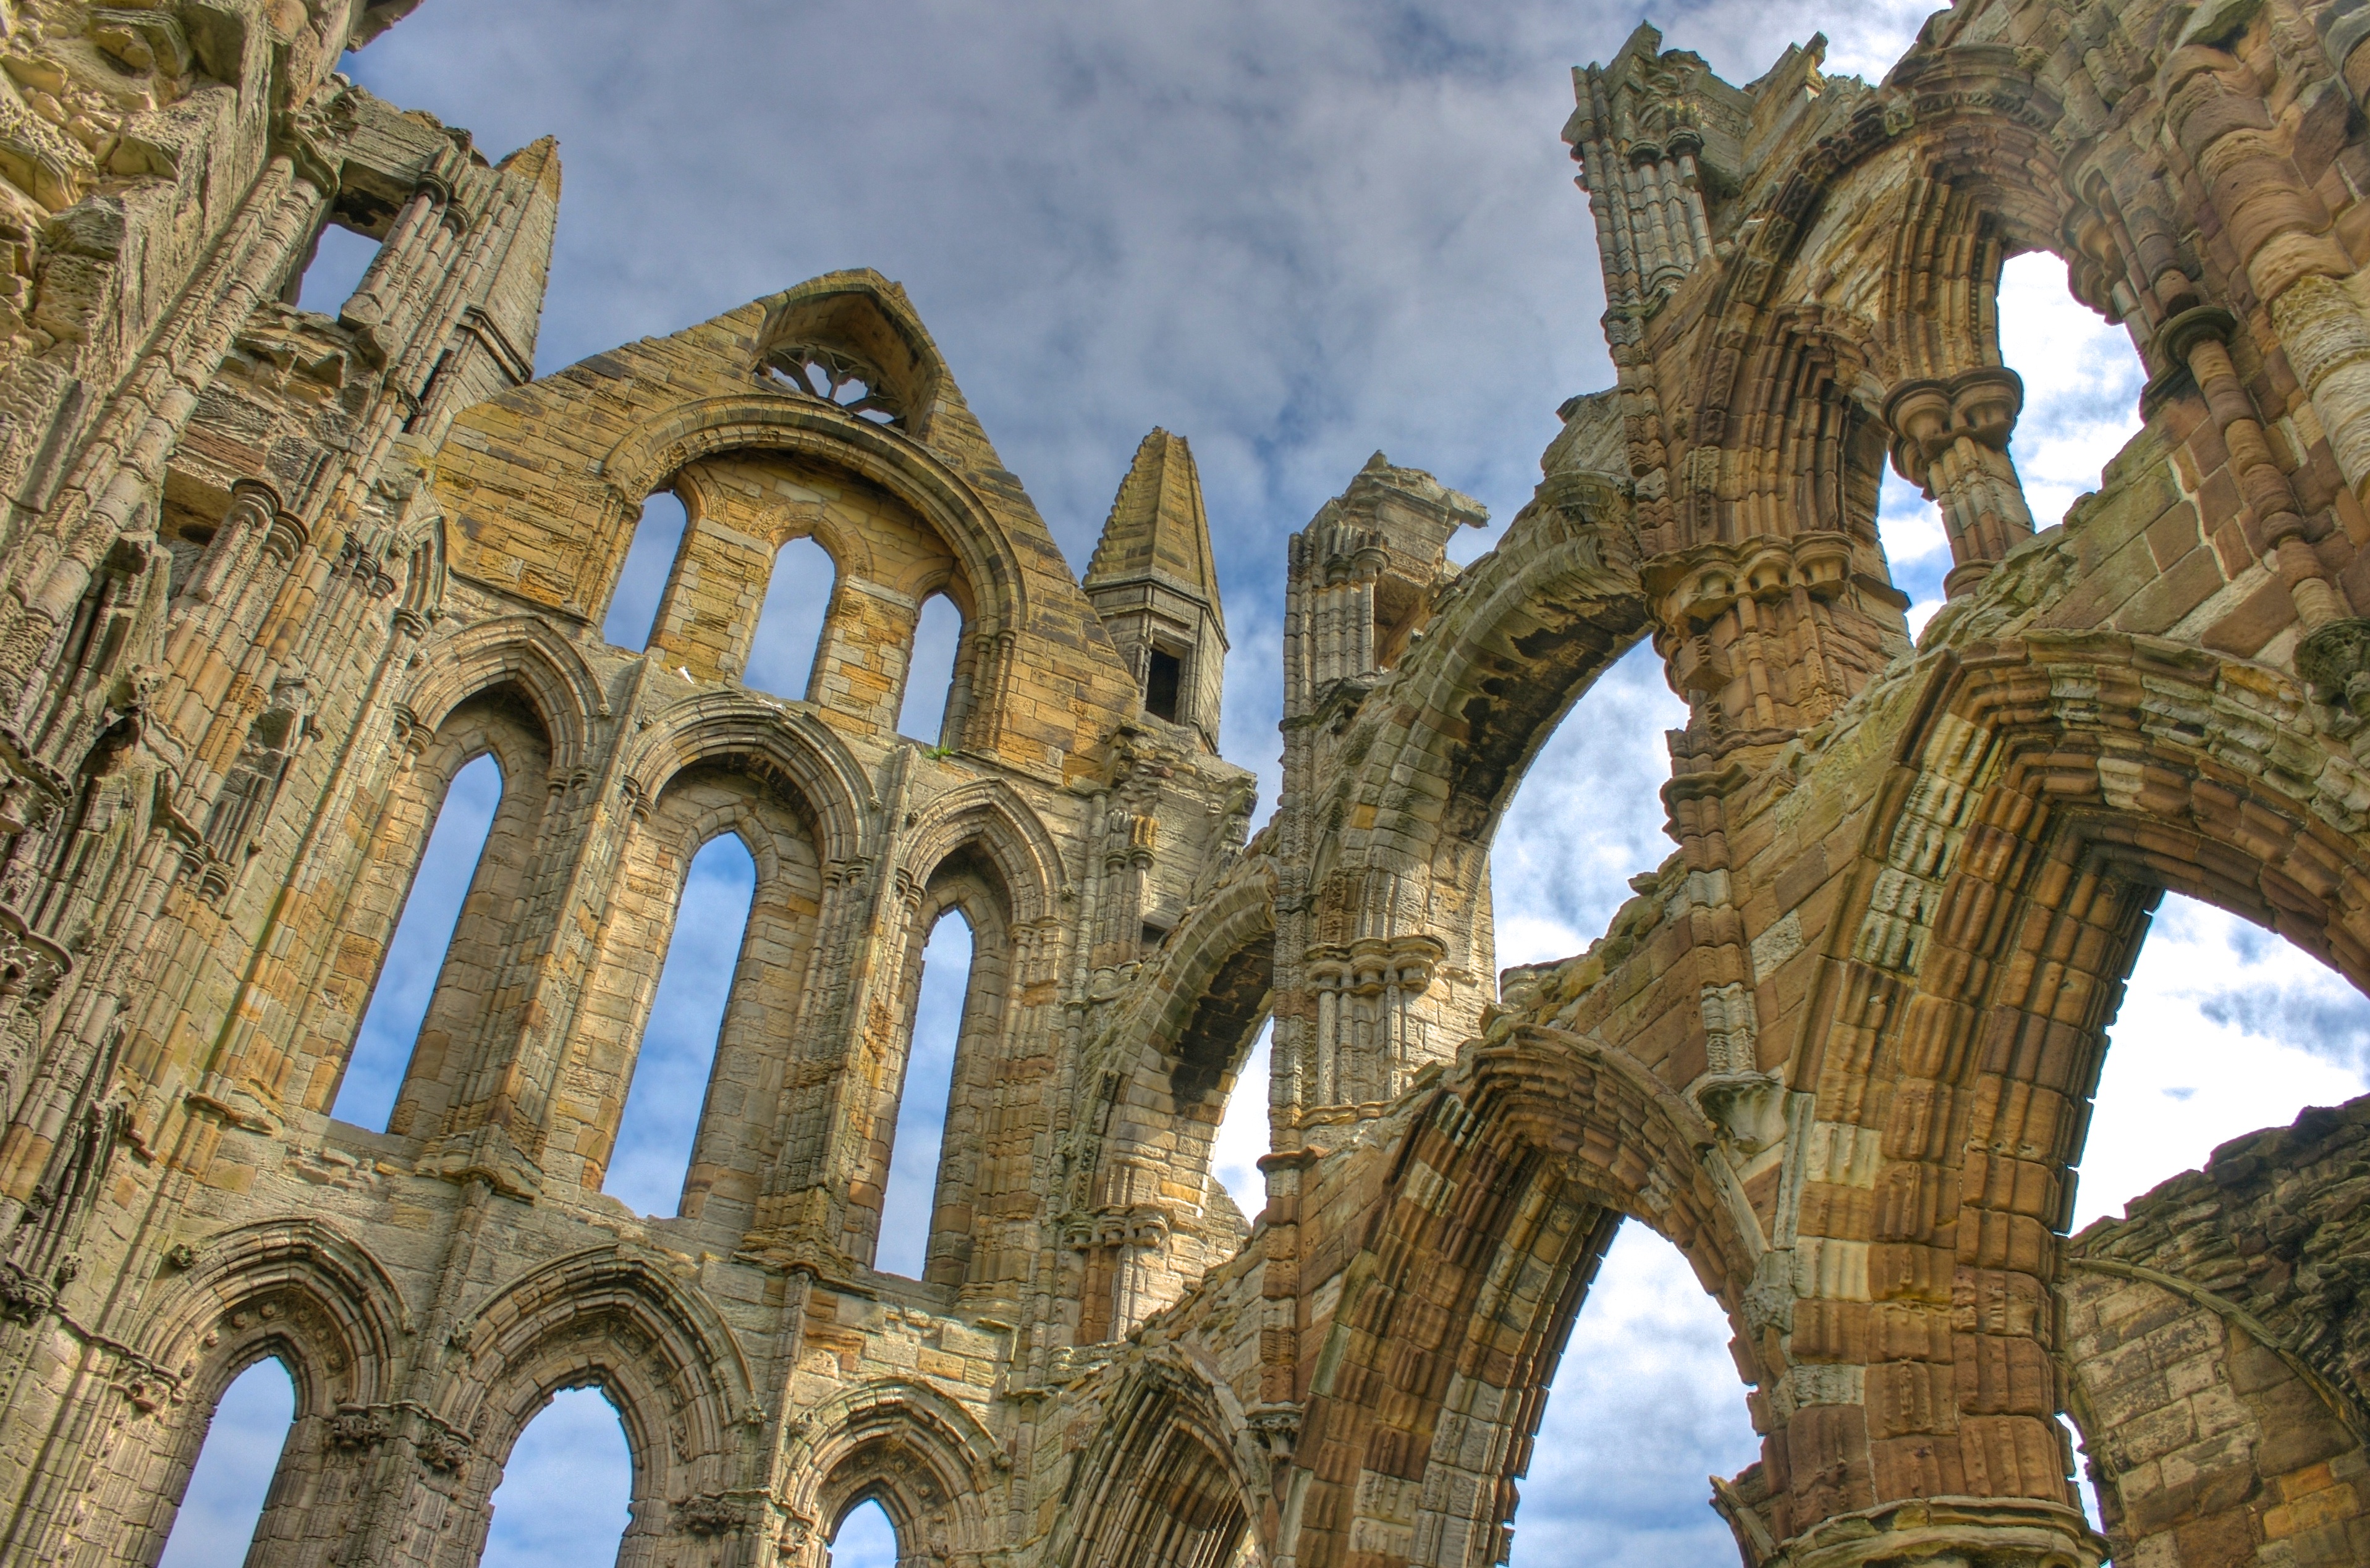 File:Whitby Abbey ruins 18.jpg - Wikimedia Commons